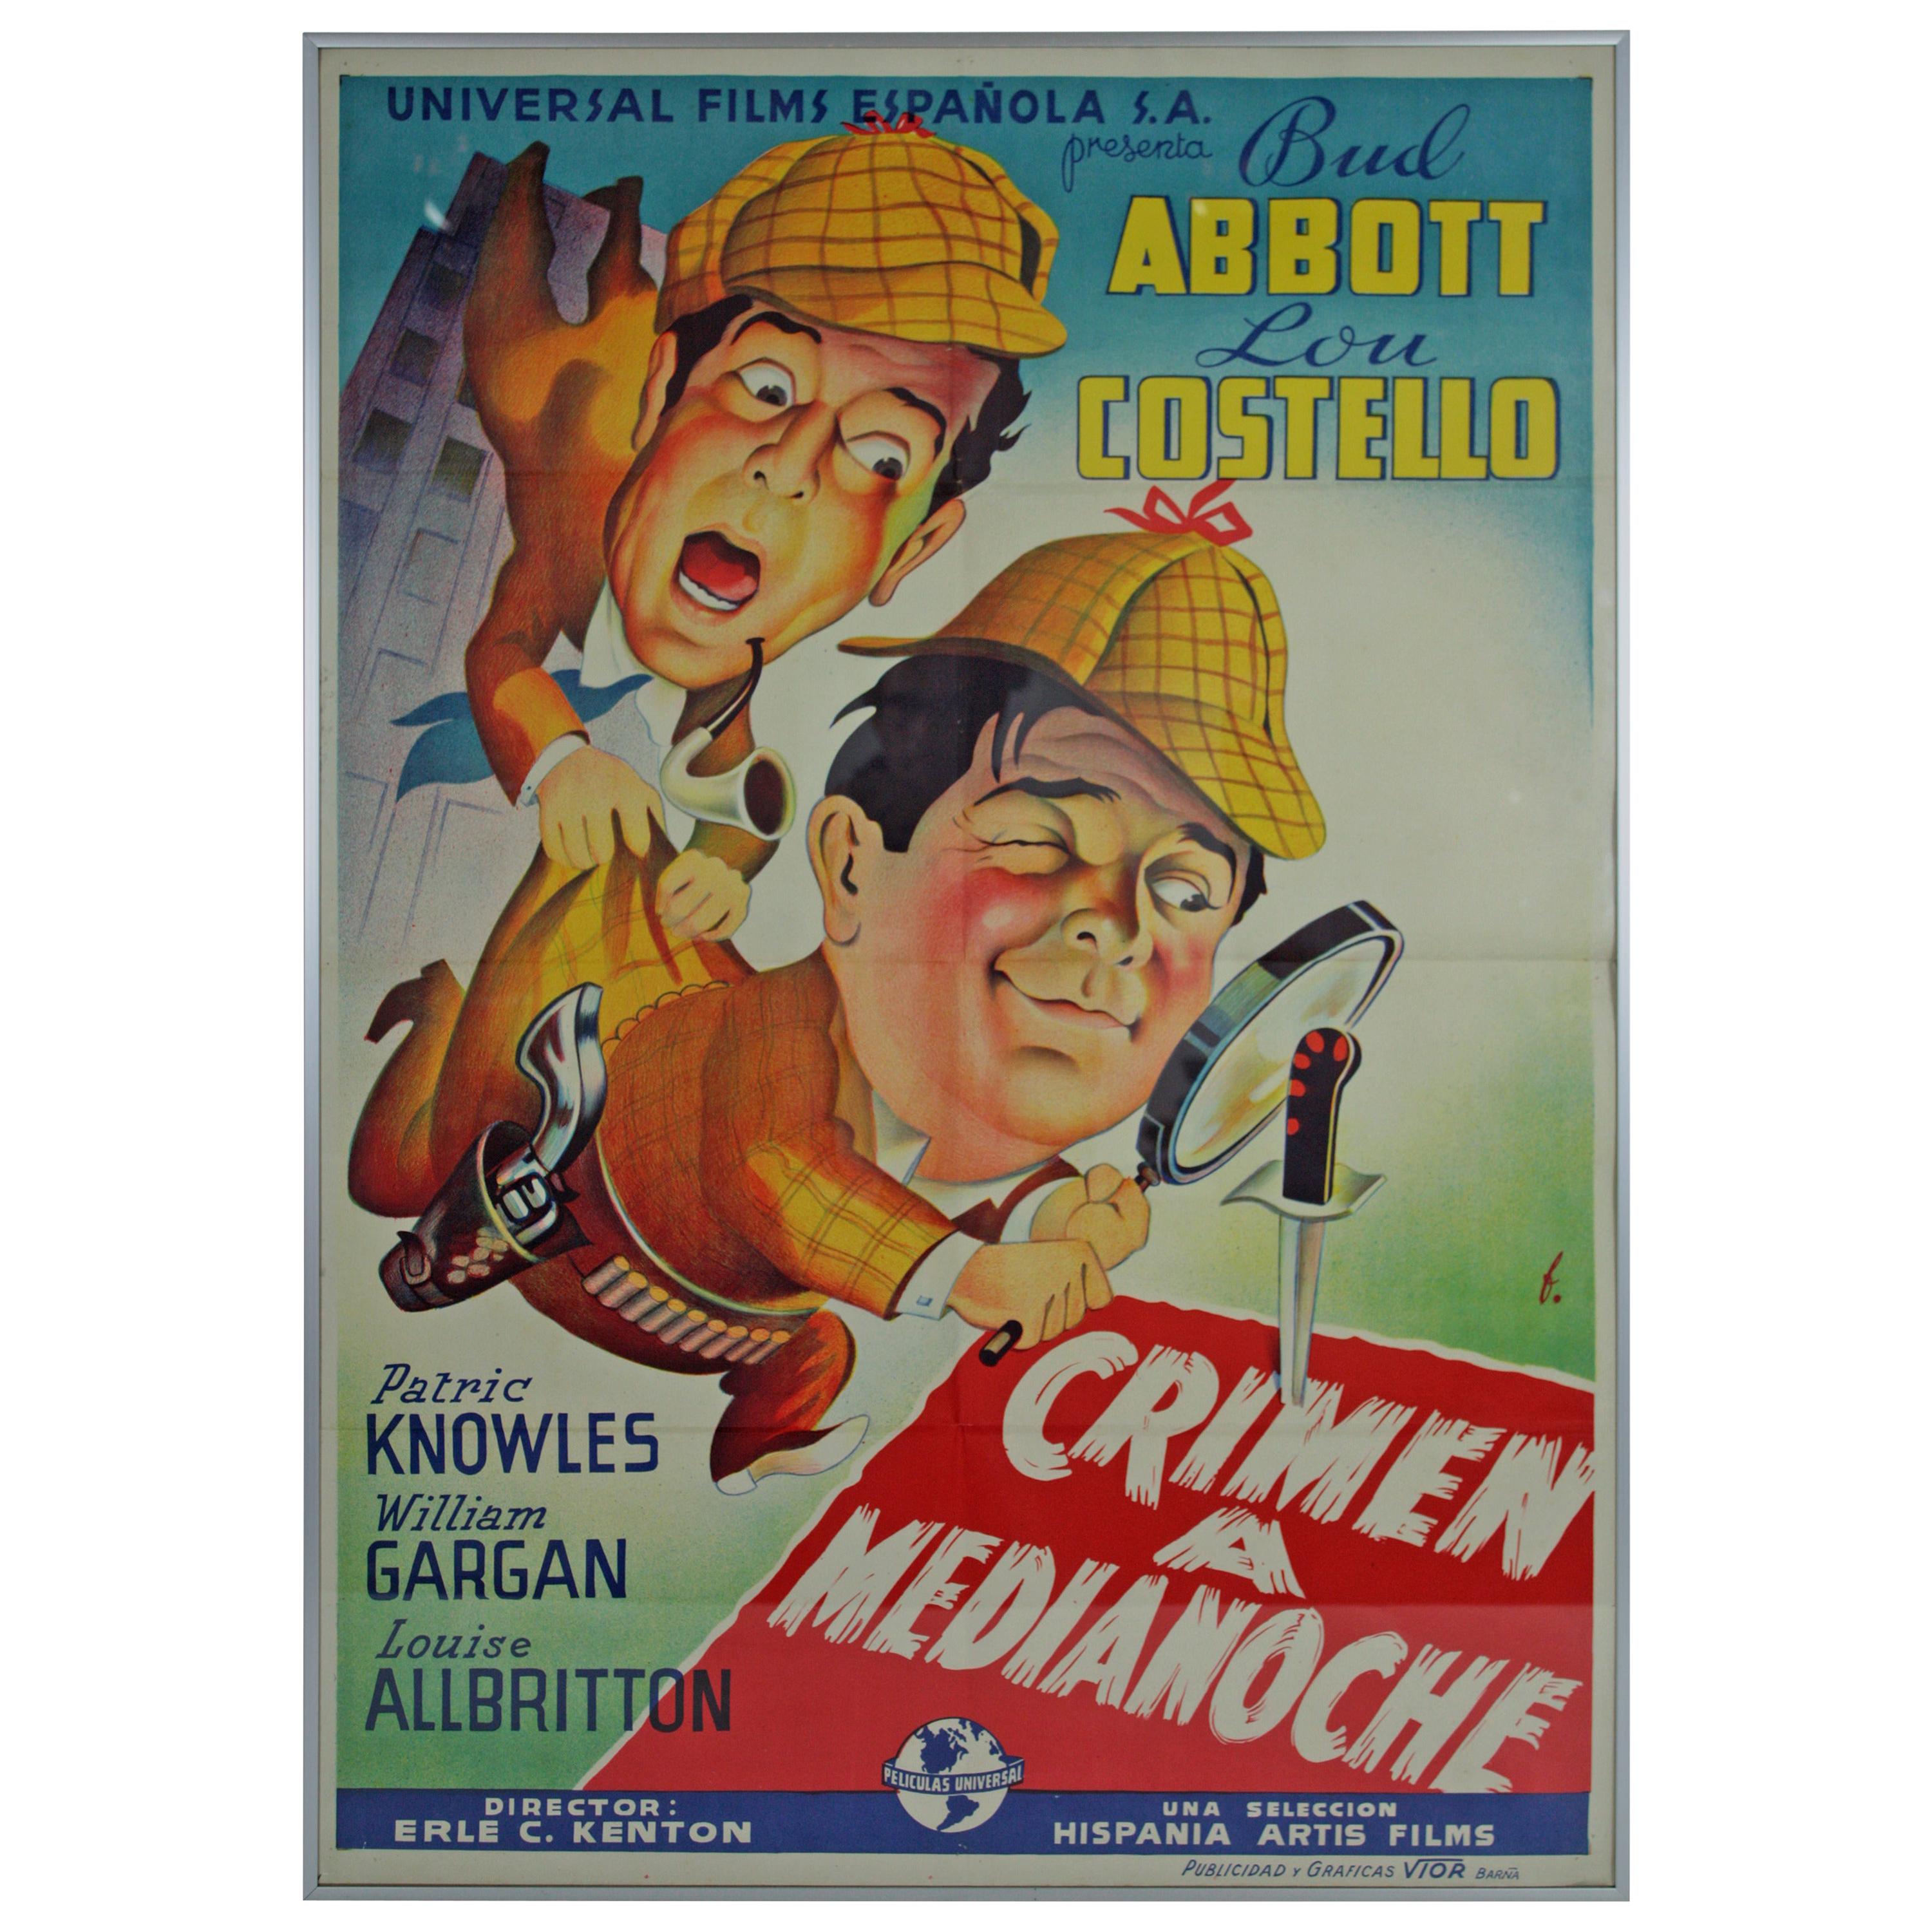  "Who done it?" Spanish Film Poster, 1944